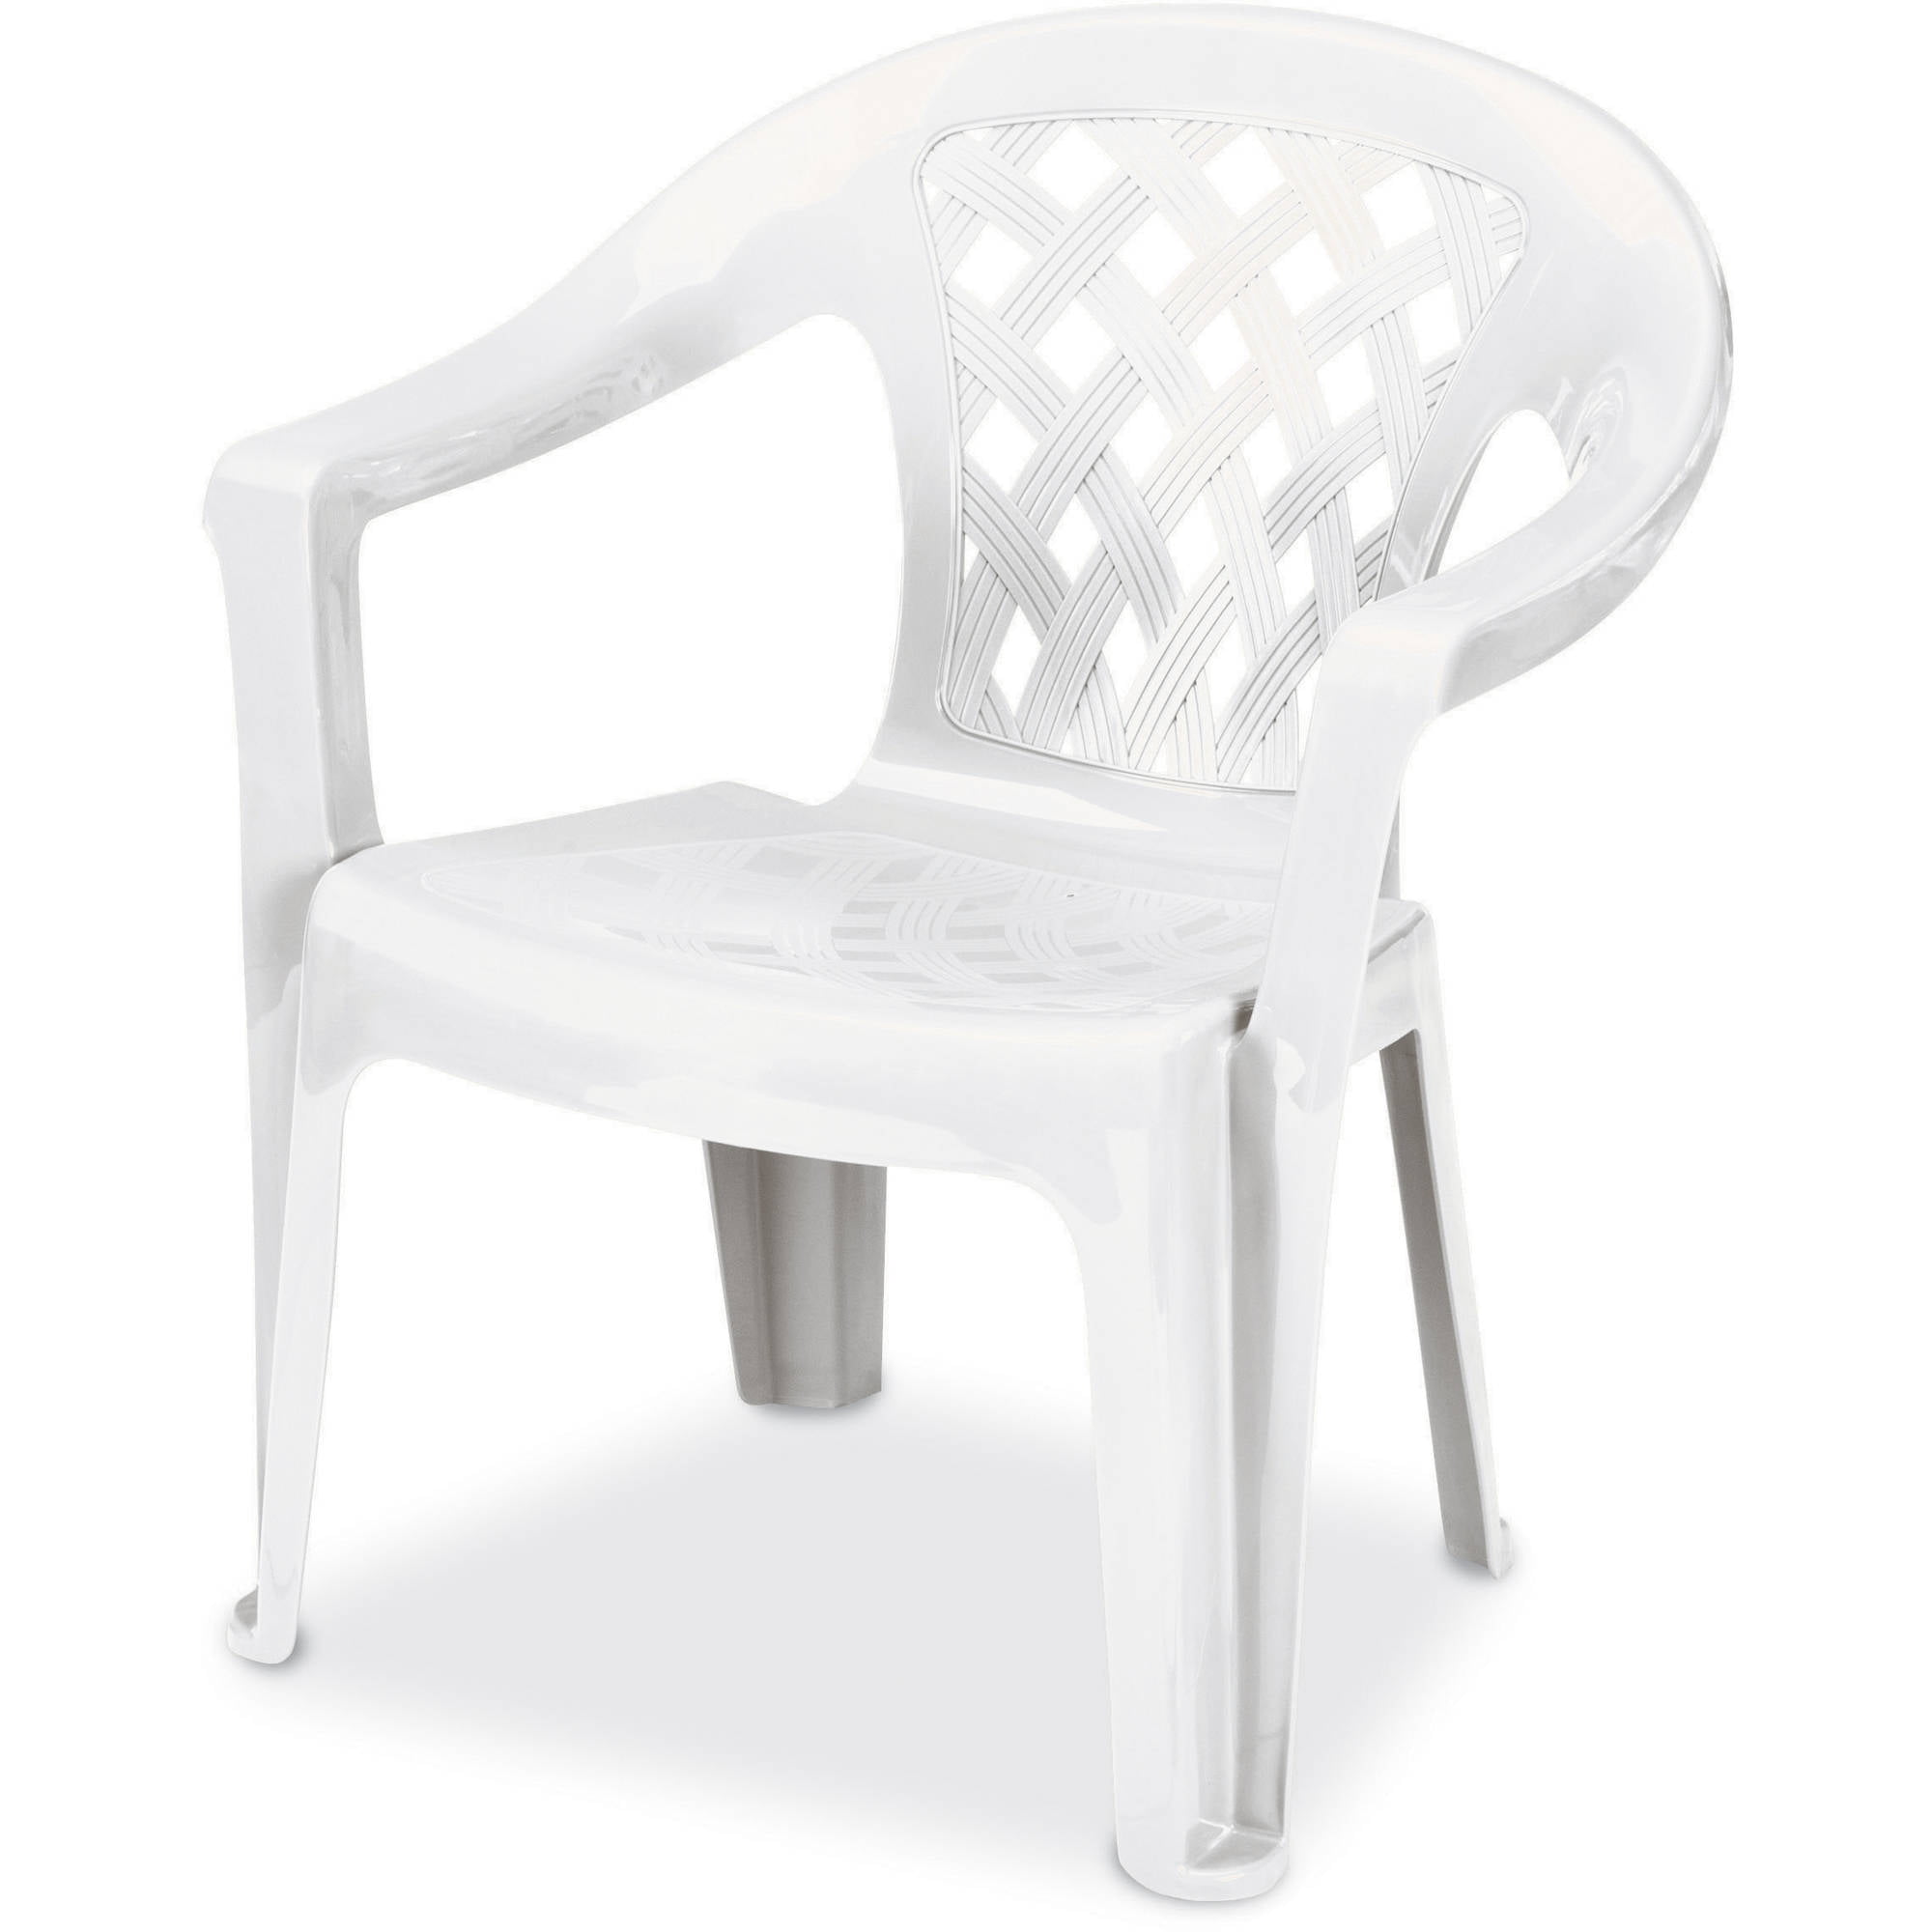 US Leisure Resin Big & Tall Low Back Chair, White – Walmart Inventory